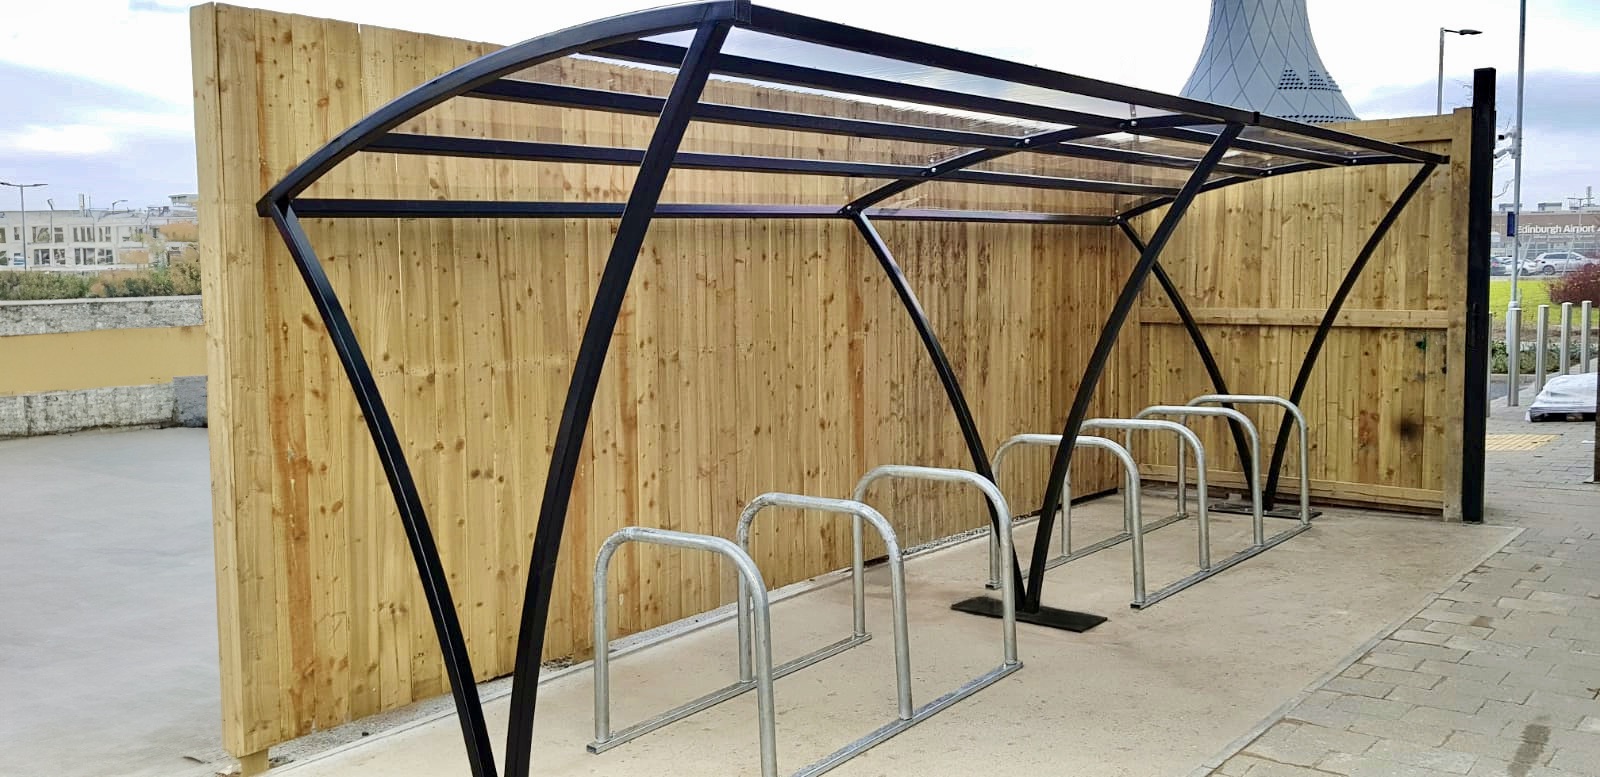 10 space Chelsea shelter with black RAL and toastrack cycle racks